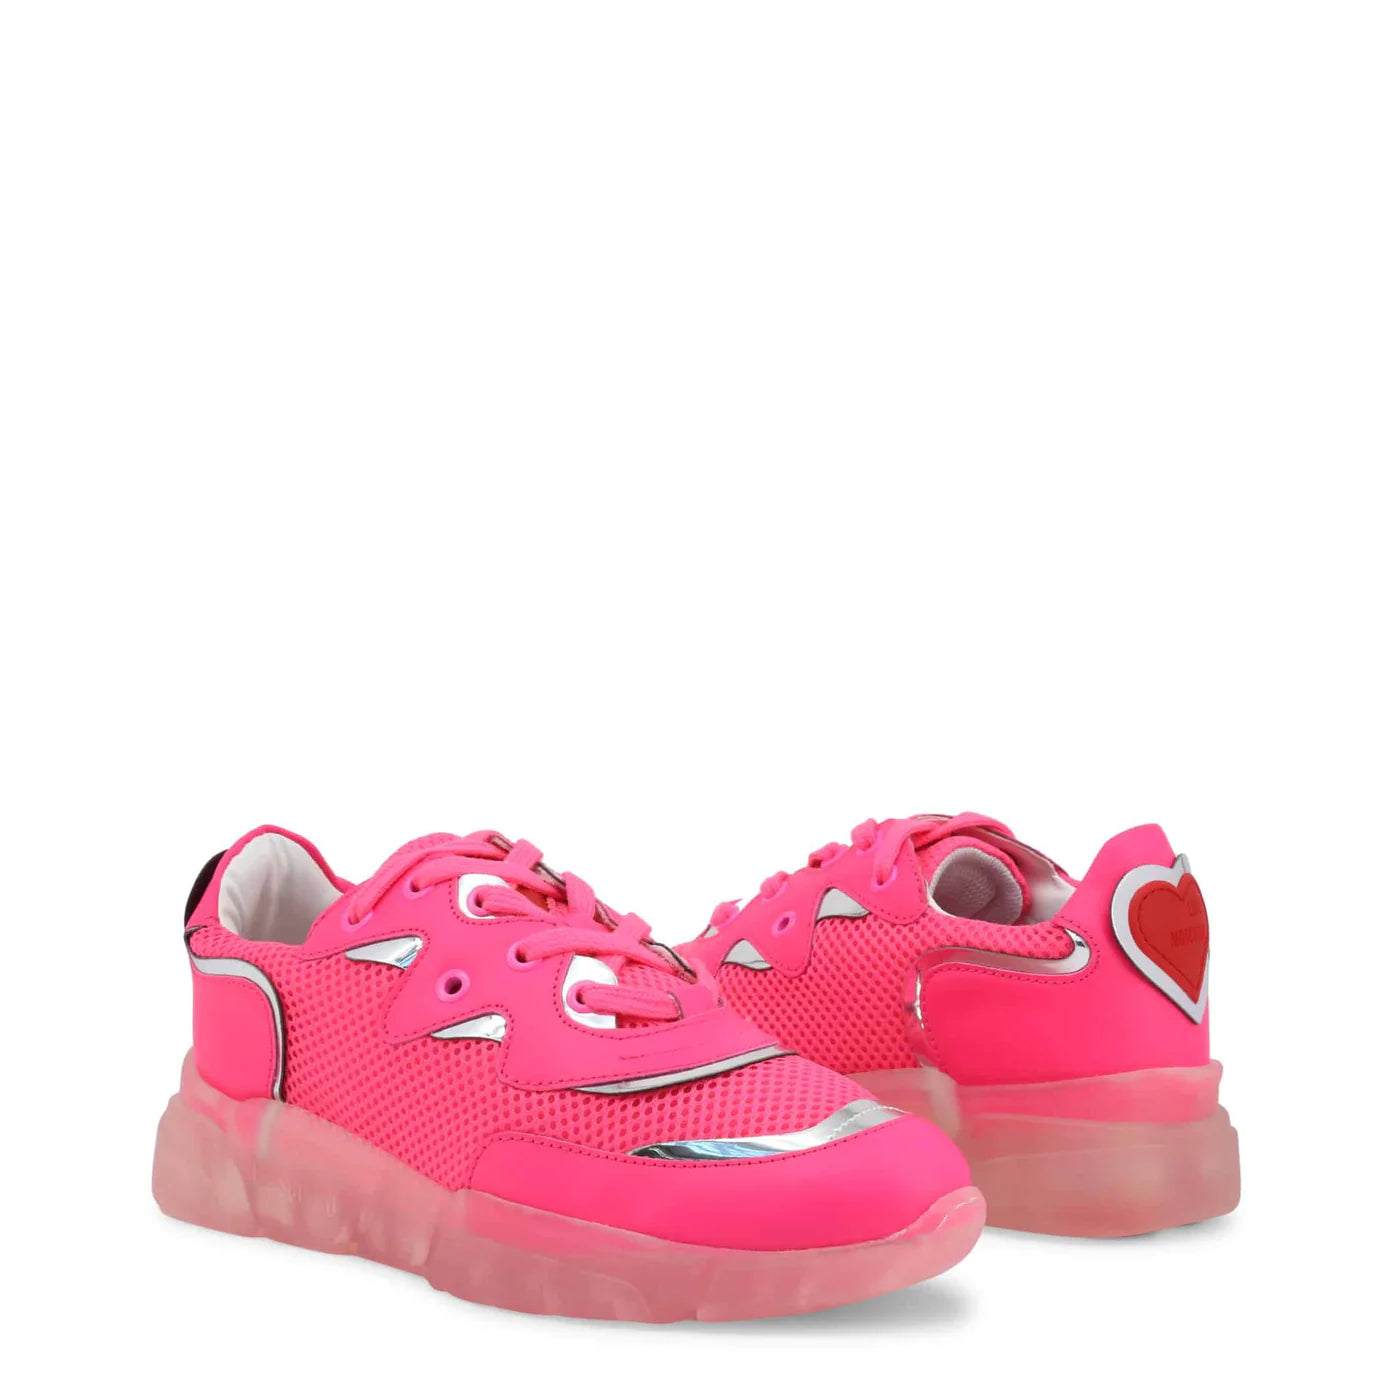 Love Moschinno Sneakers